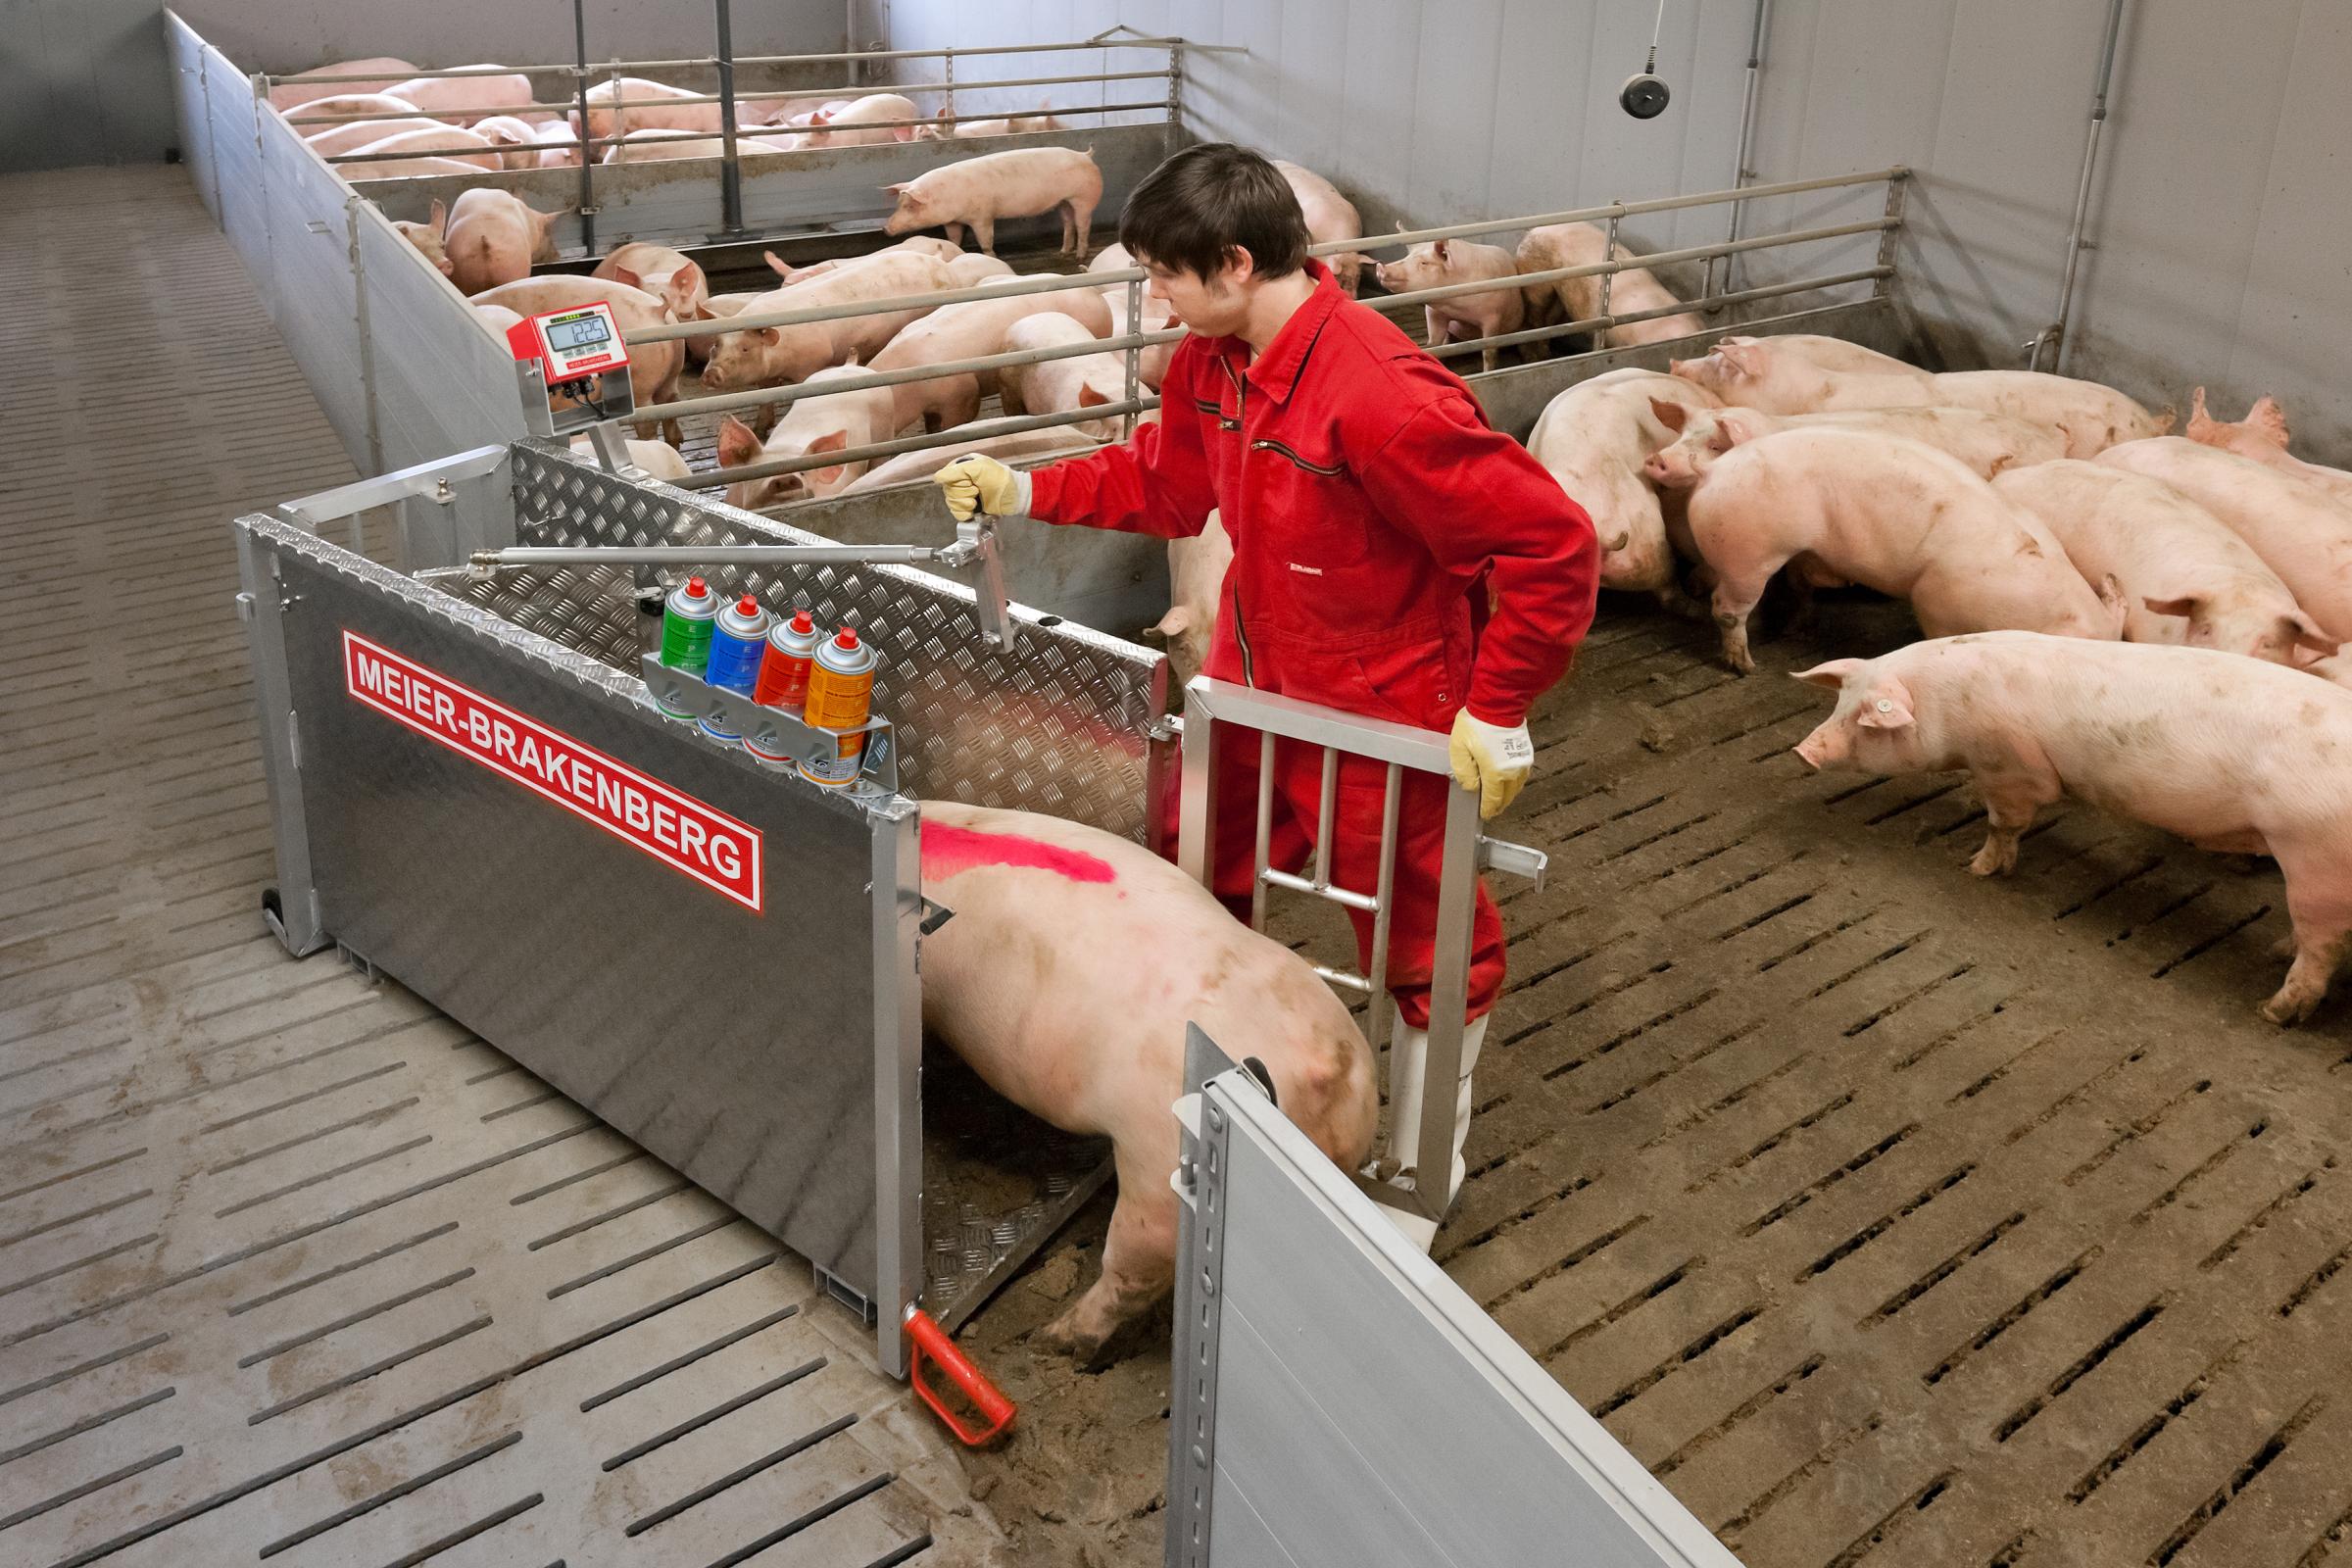 A new pig weighing crate made by Germany company Meier-Brakenberg